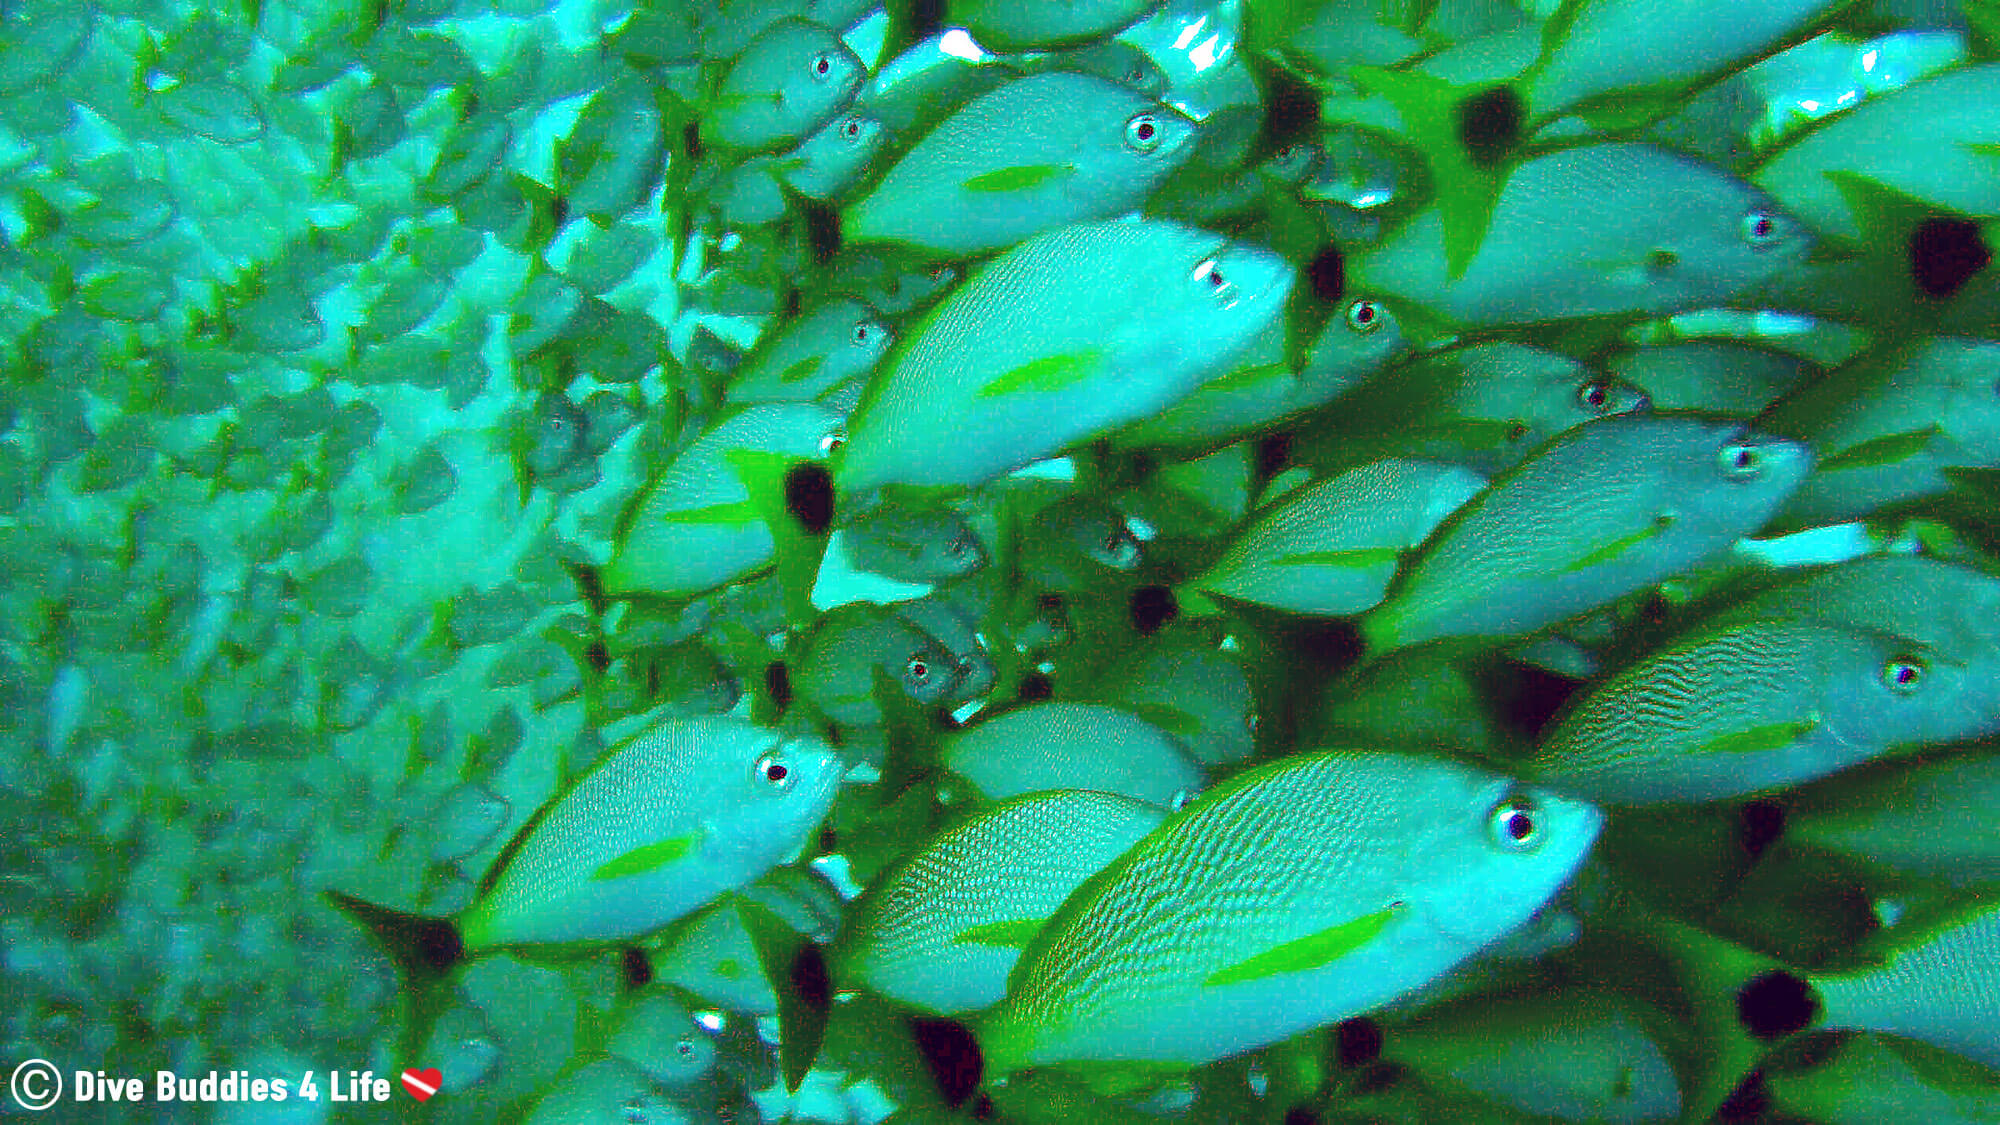 Scuba Diving With A Large School Of Grunts At Bat Islands In The Pacific, Costa Rica